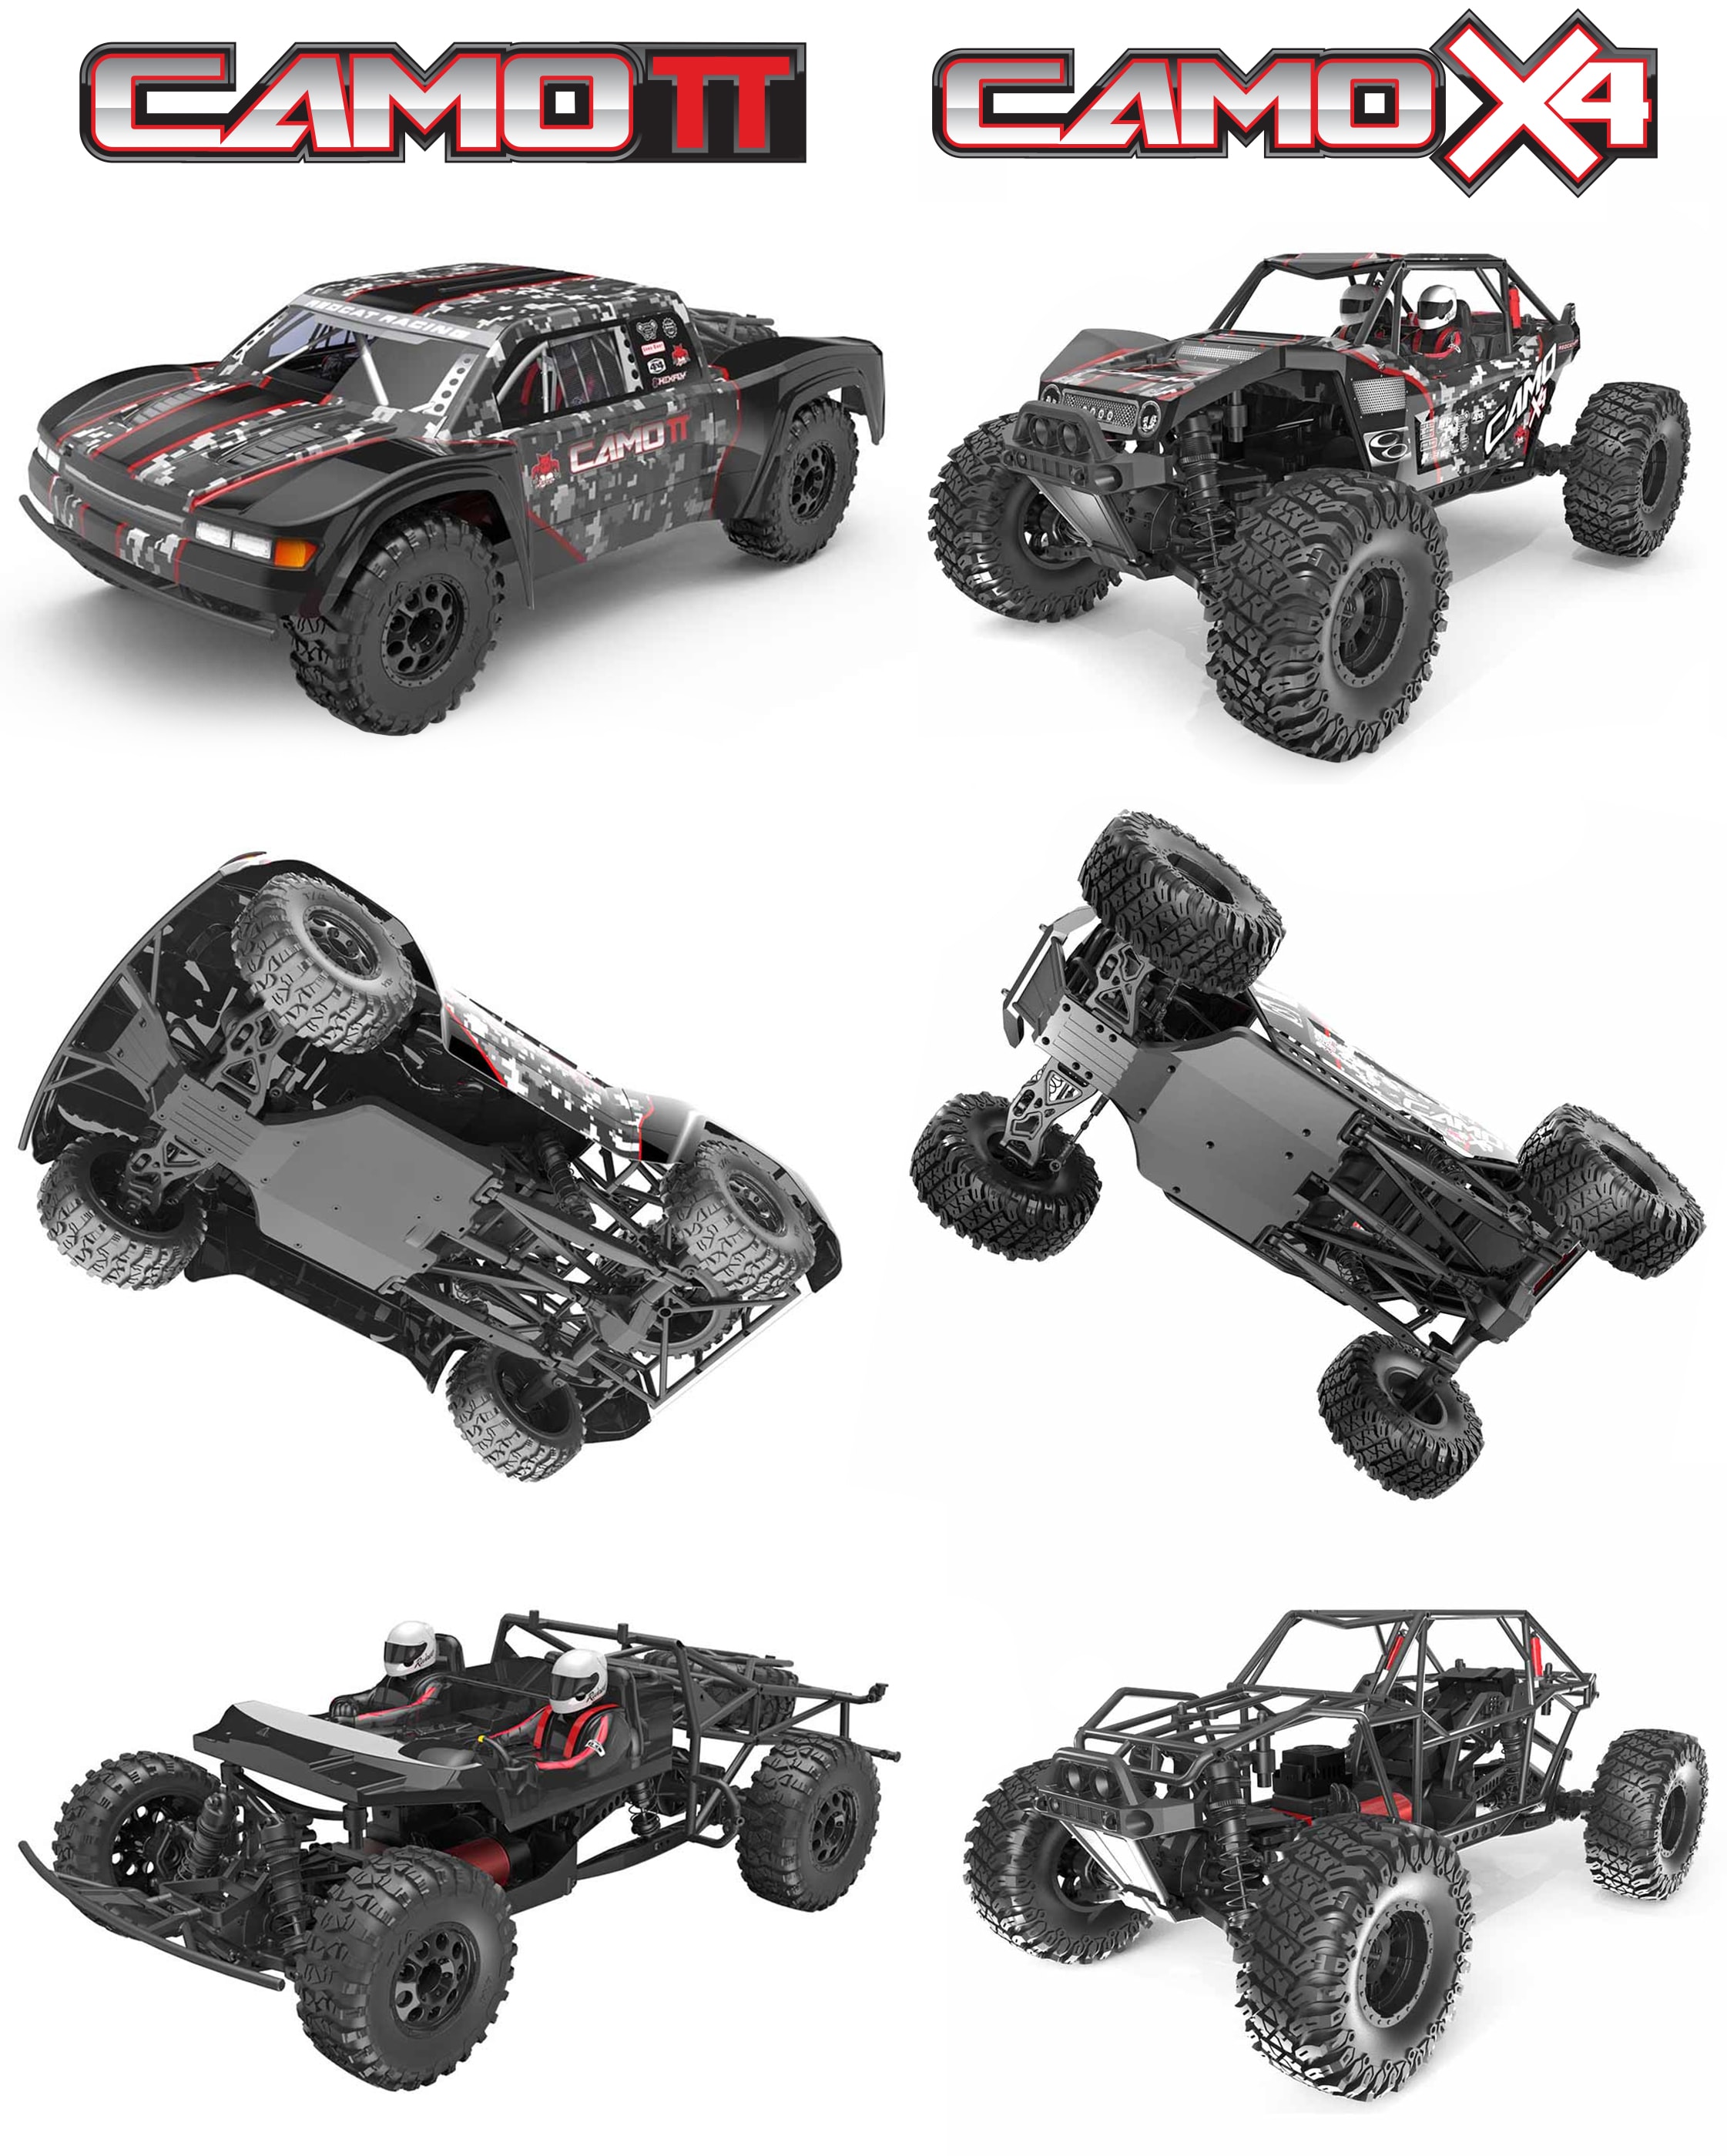 Redcat Racing Camo-X4 and Camo-TT Side-by-Side